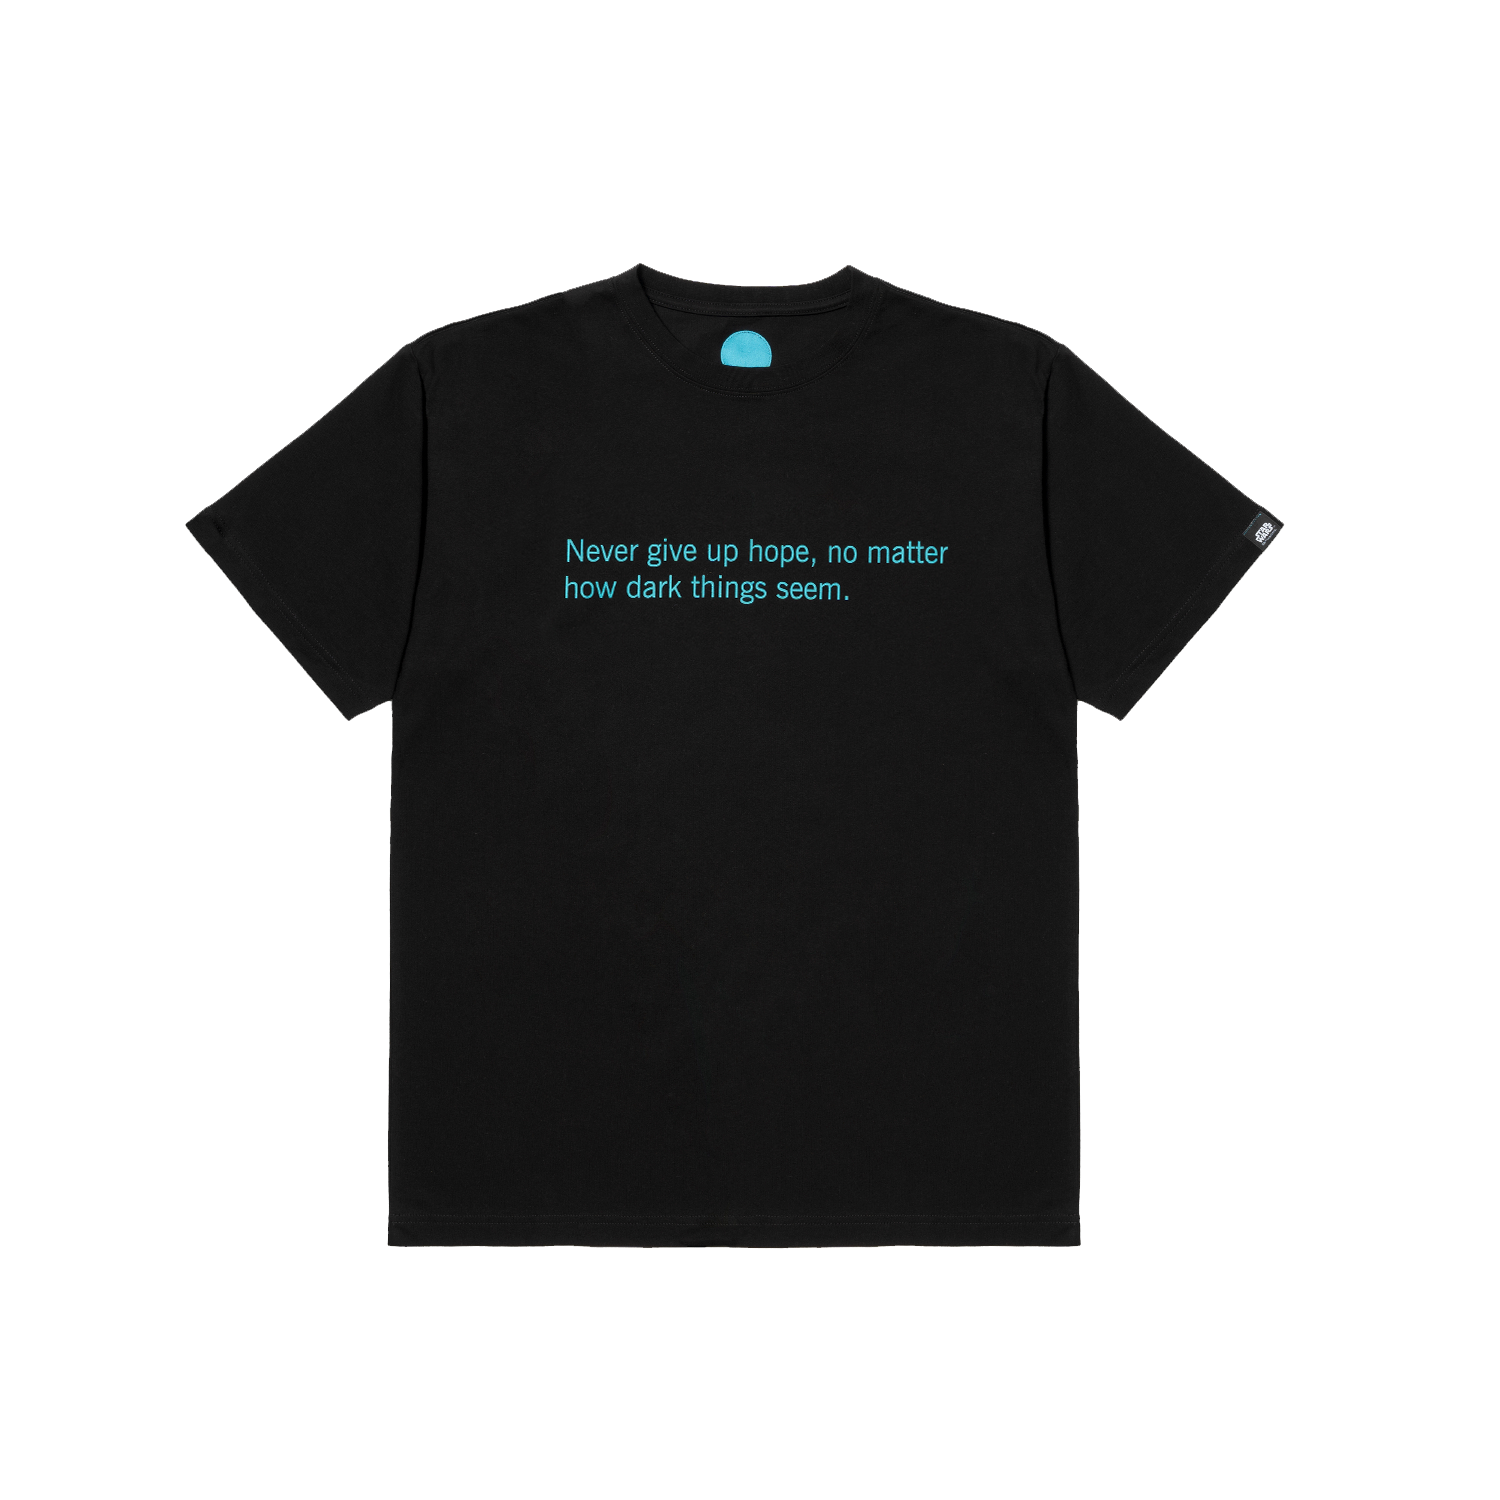 THE CLONE WARS QUOTE S/S TEE